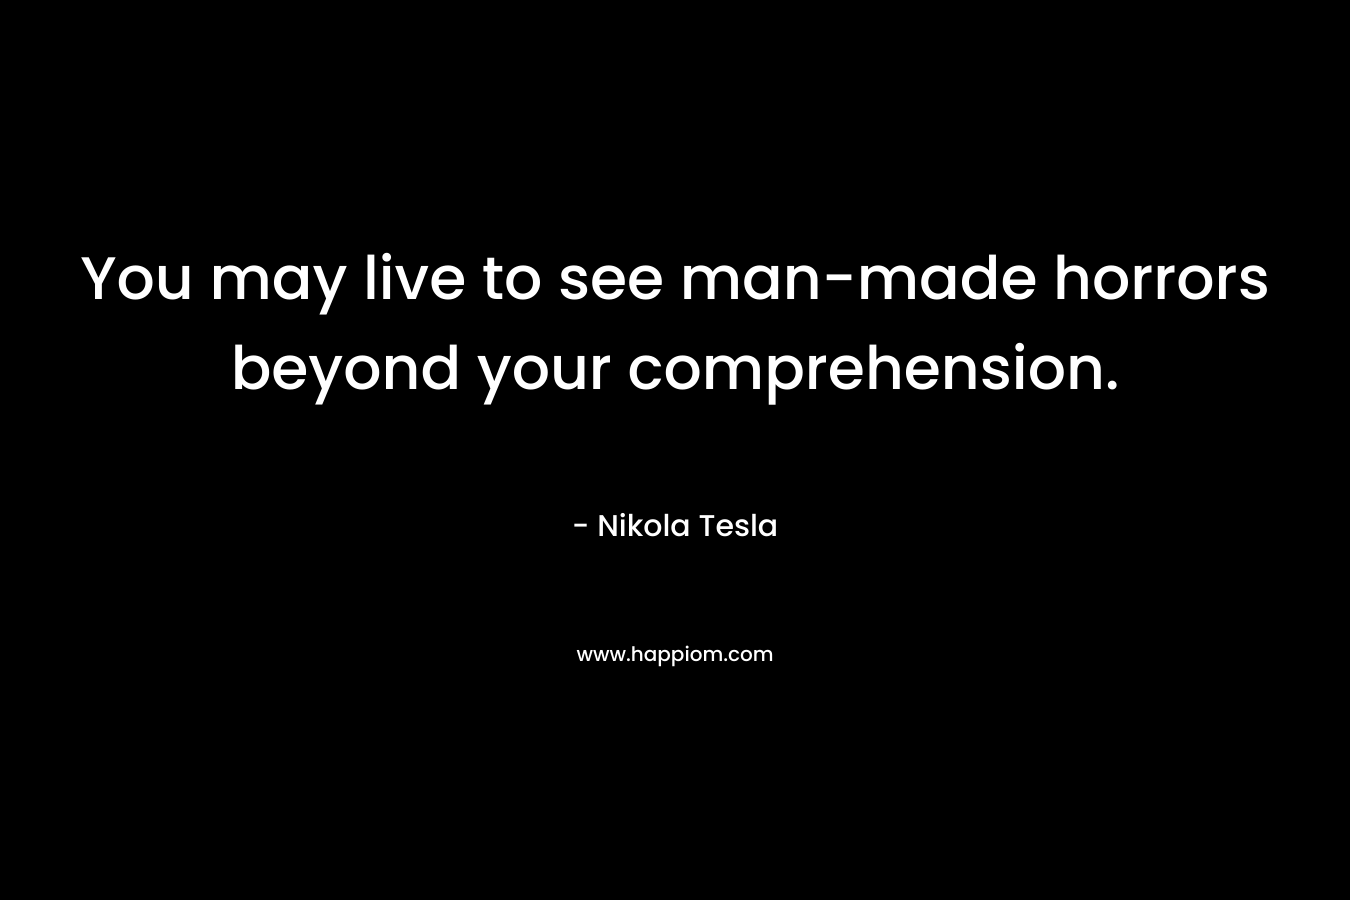 You may live to see man-made horrors beyond your comprehension. – Nikola Tesla